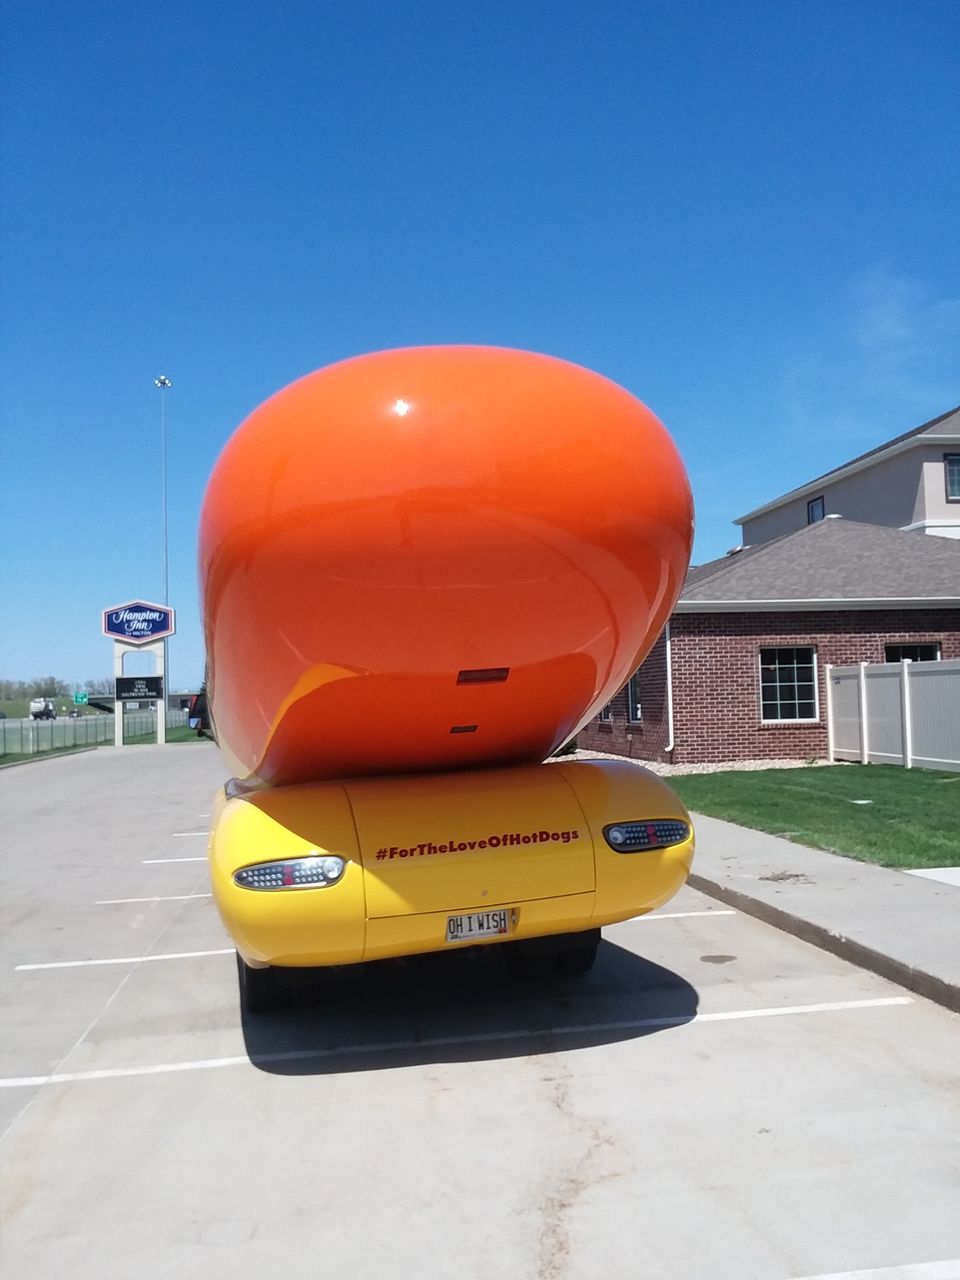 The Weinermobile is back!